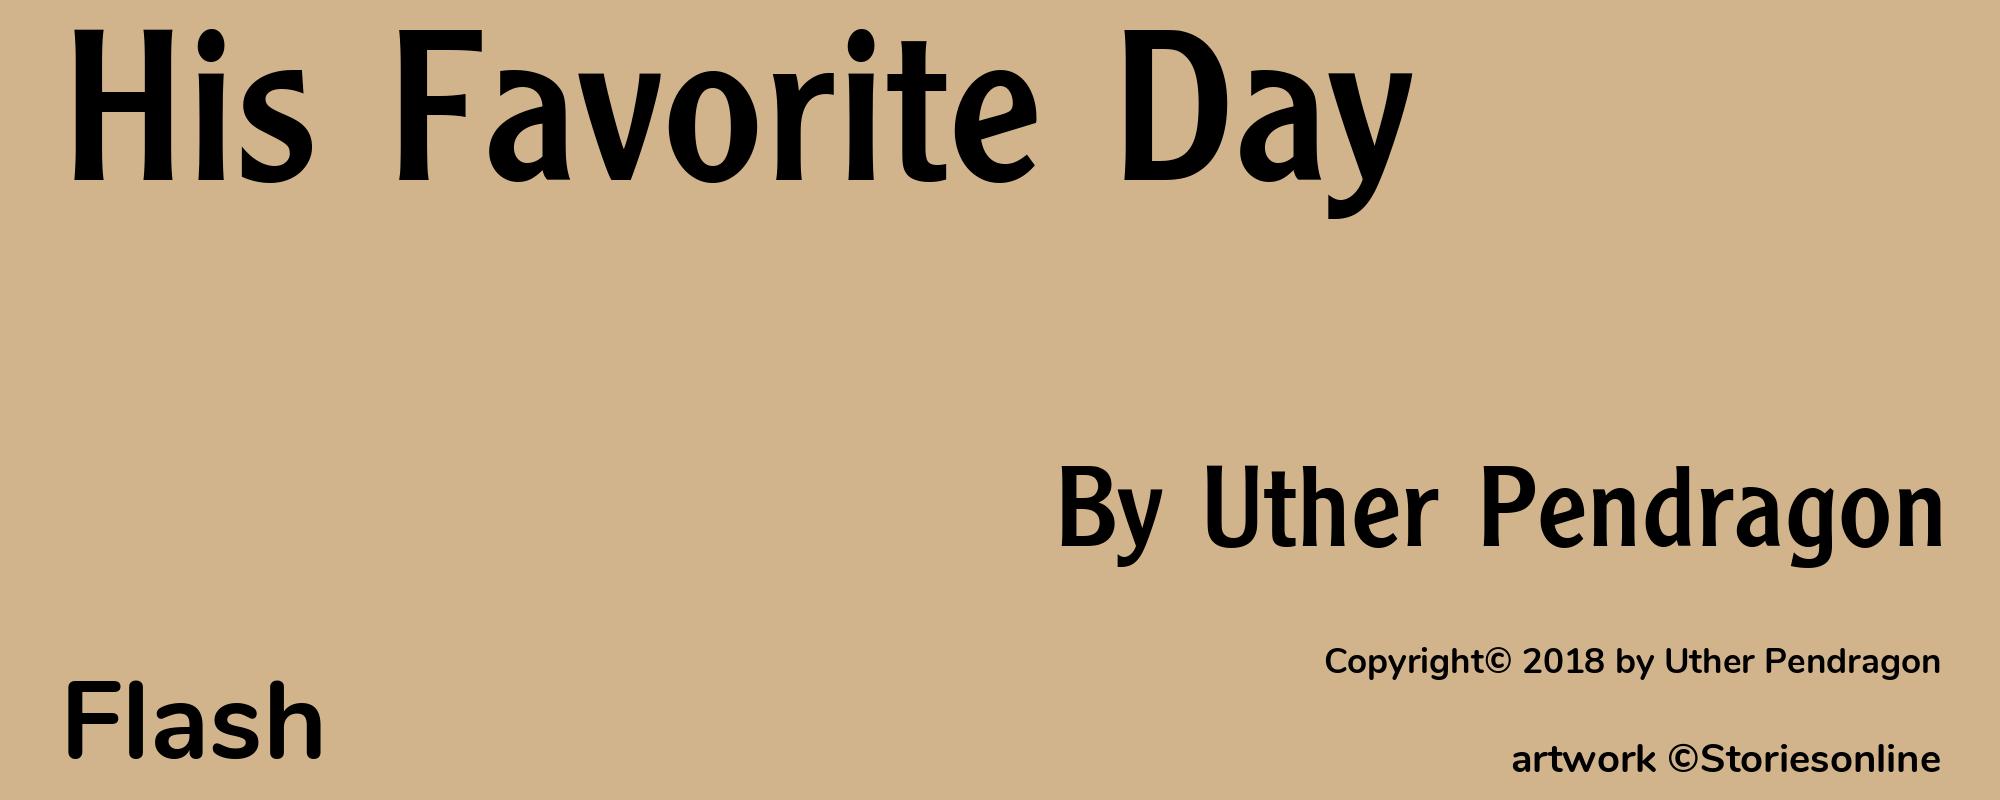 His Favorite Day - Cover